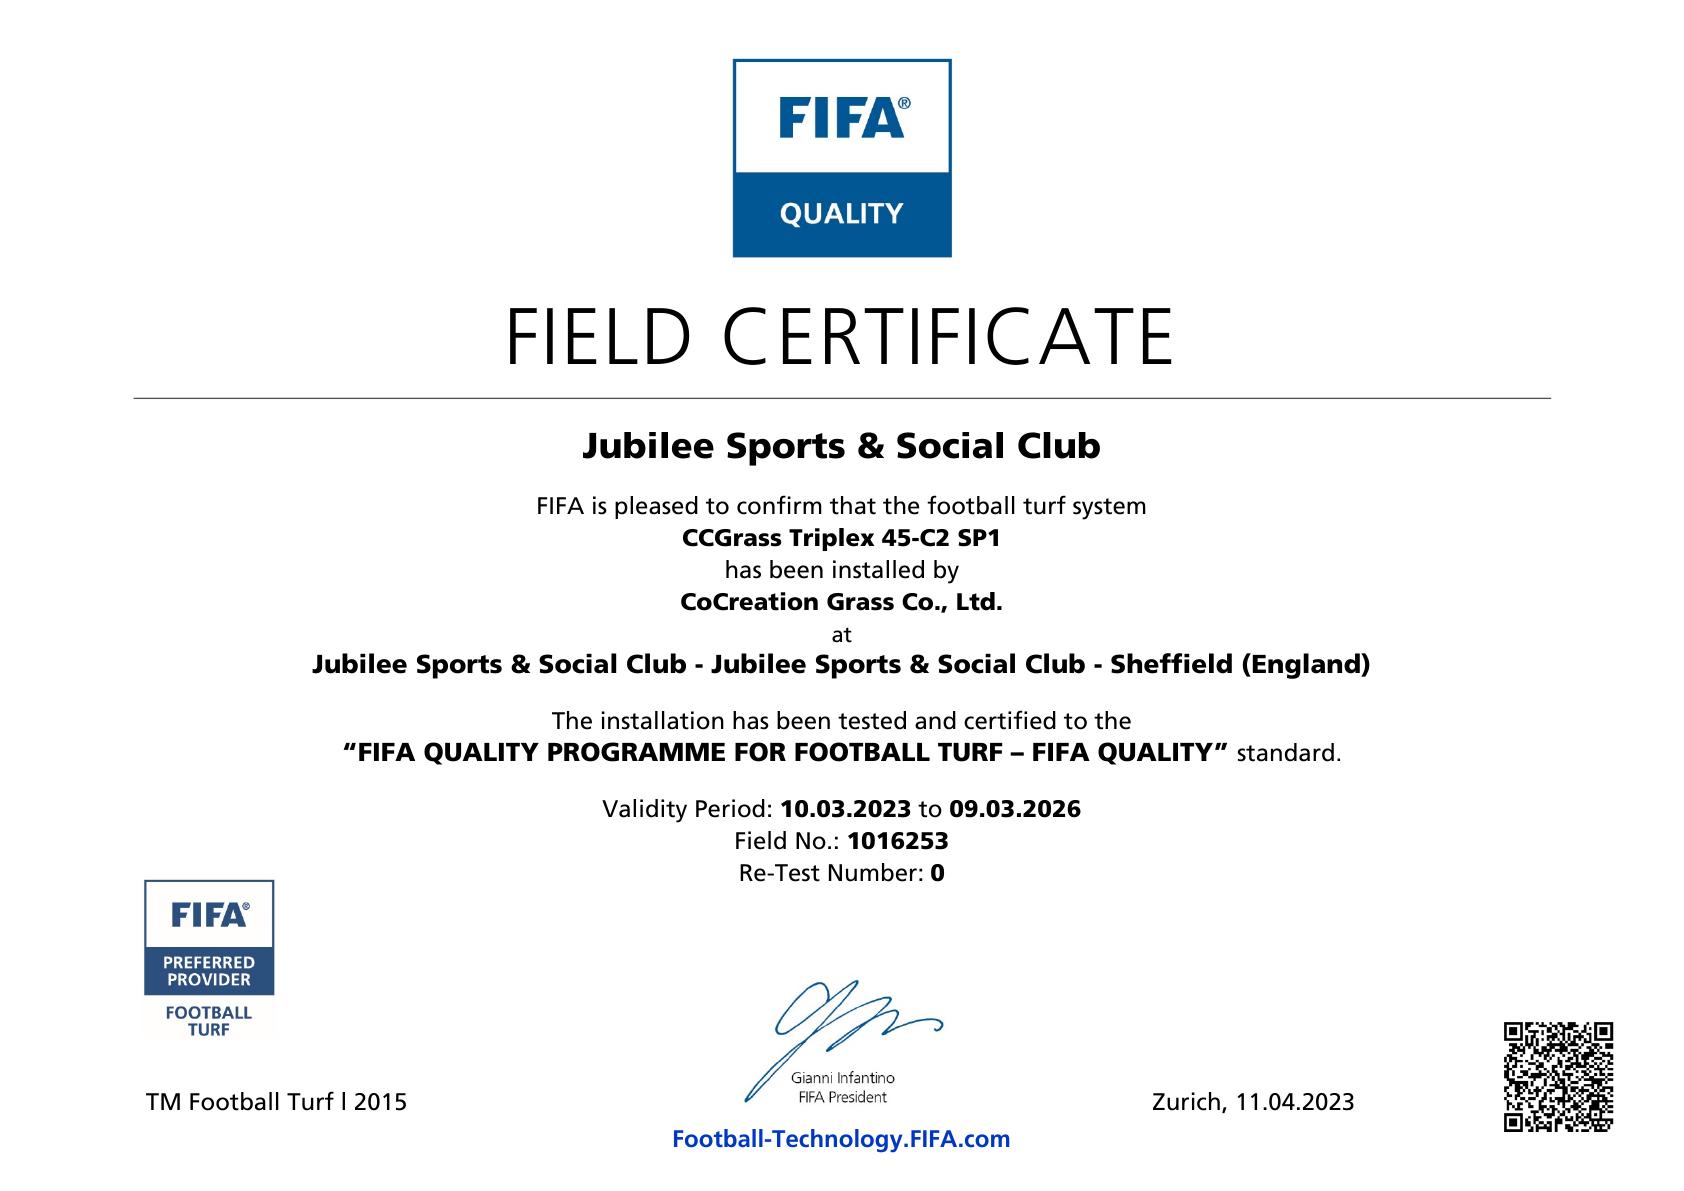 FIFA Quality Certification for Sheffield Wednesday’s Jubilee Sports & Social Club